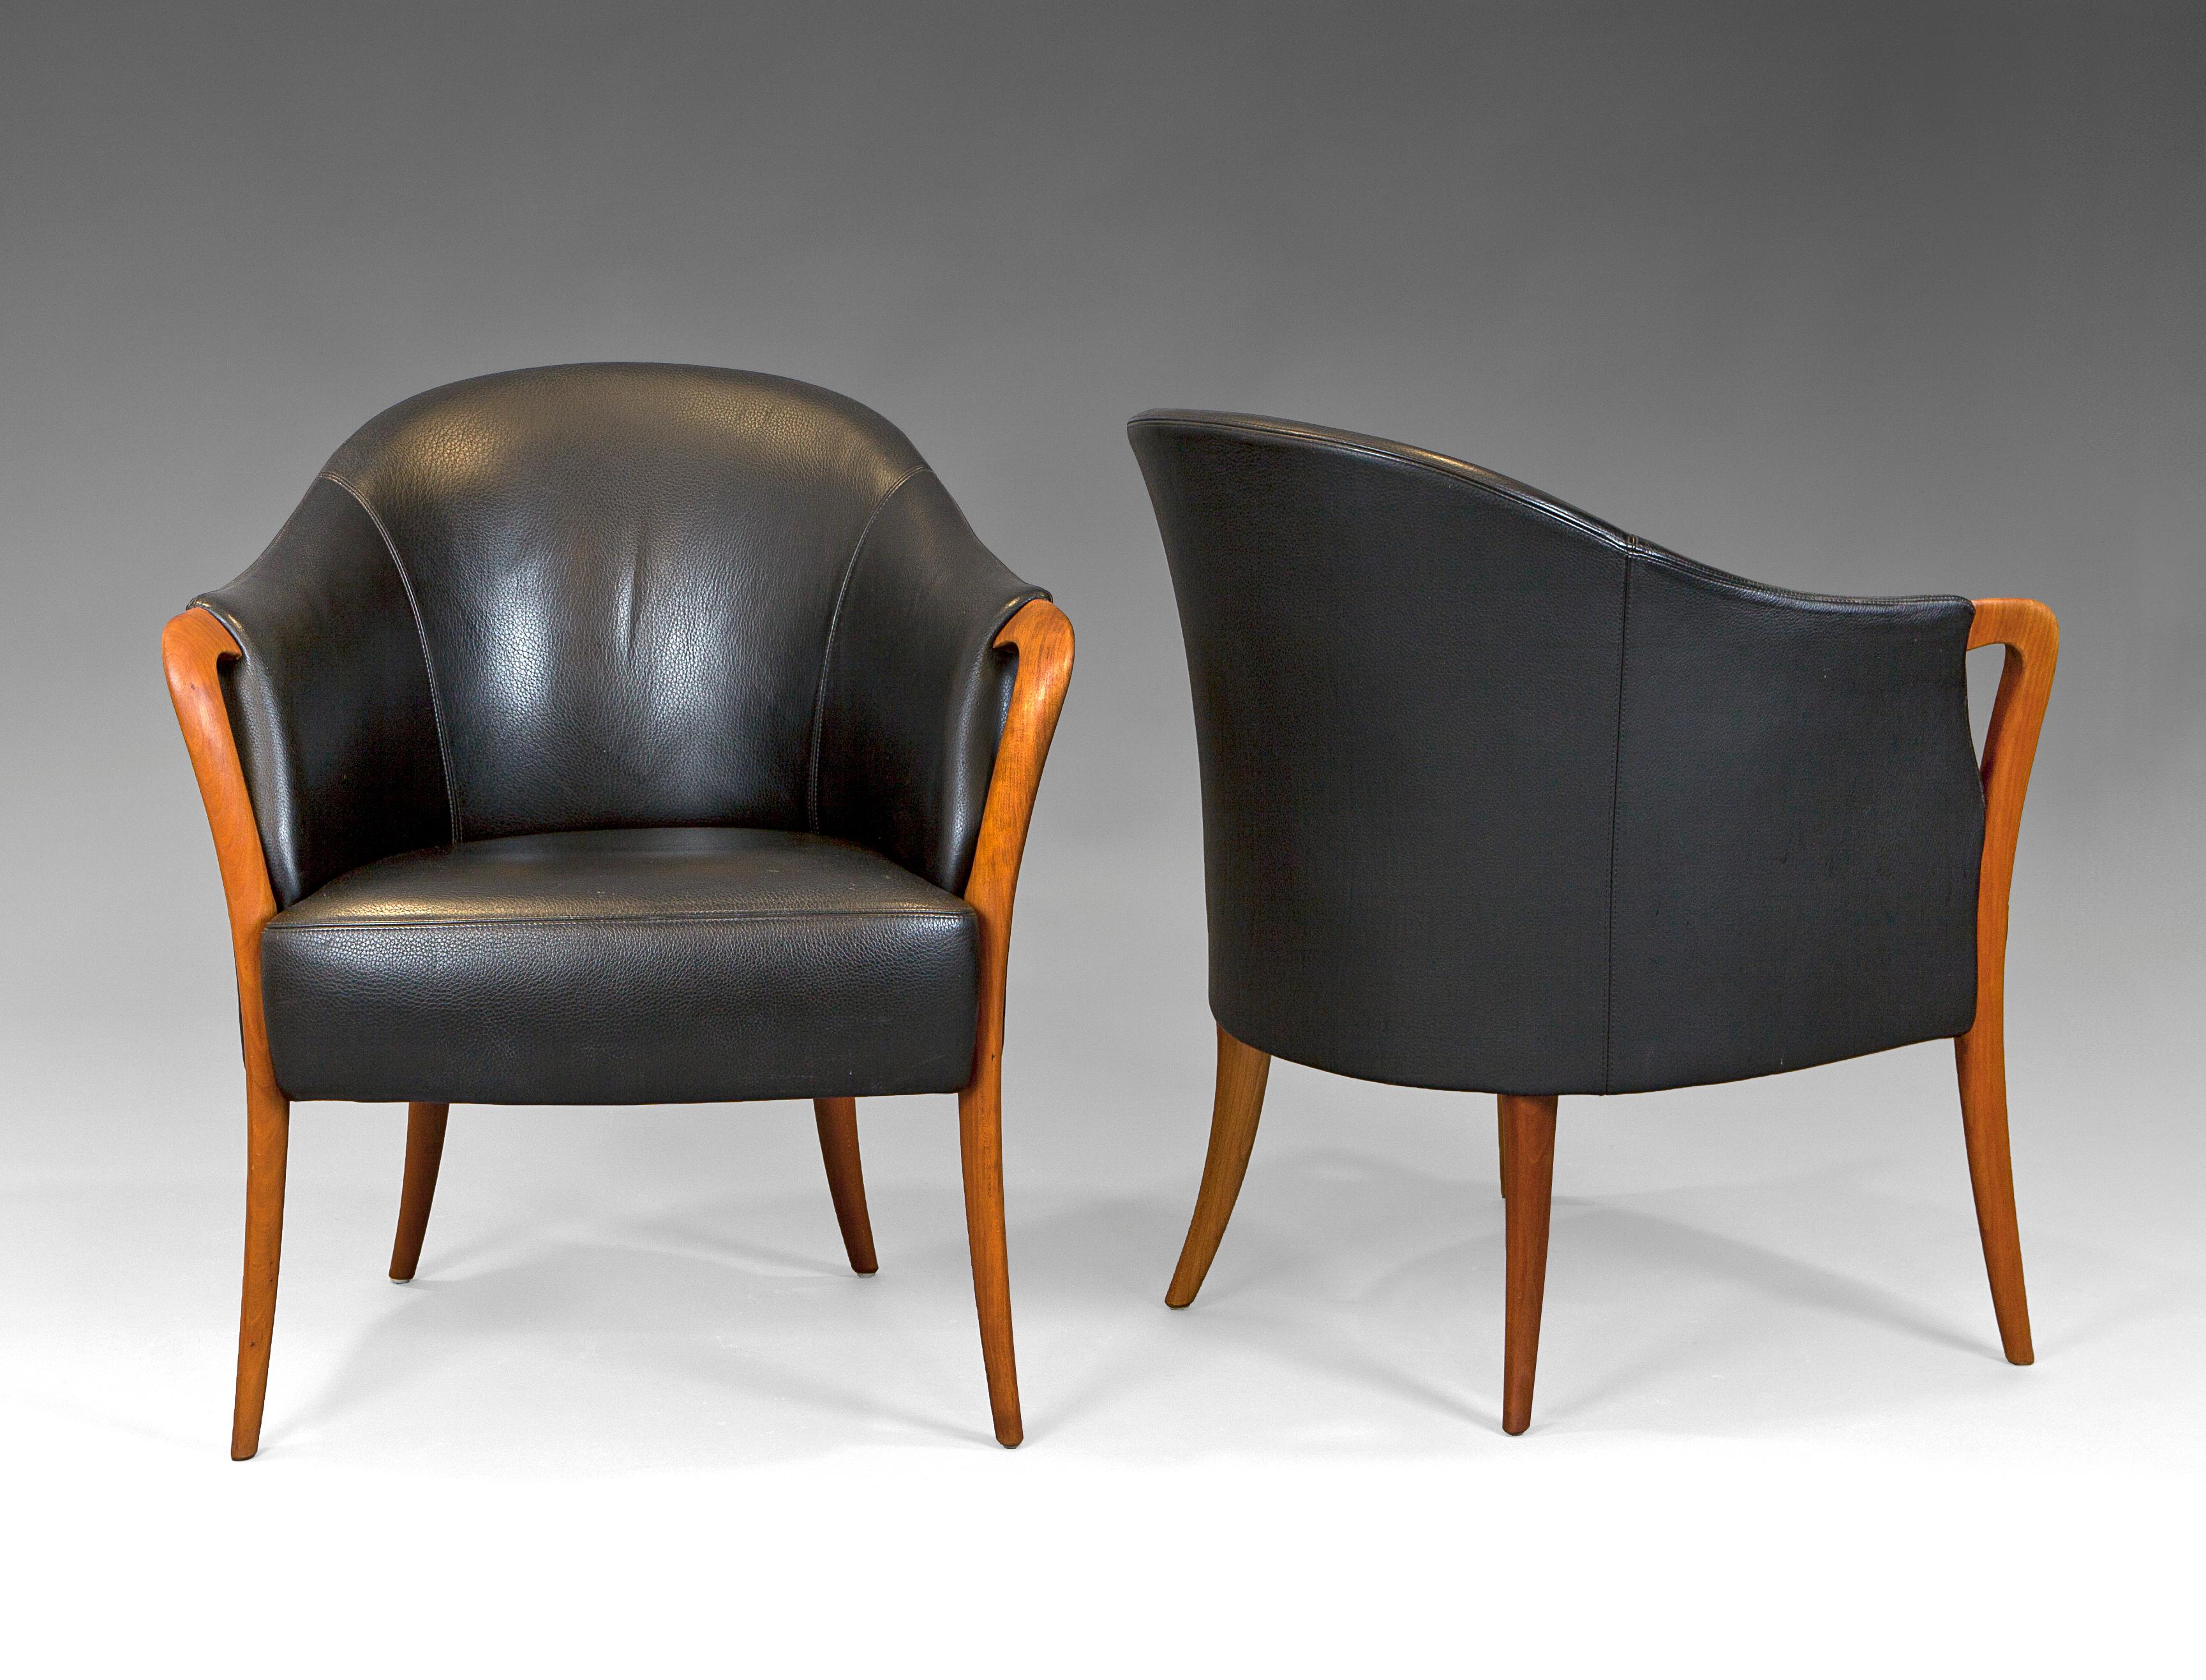 Armchairs in Walnut and Leather in style of Umberto Asnago ''Progetti'. Italy, 80´s. 
Walnut and black leather. Fully restored wood and original leather in perfect condition.